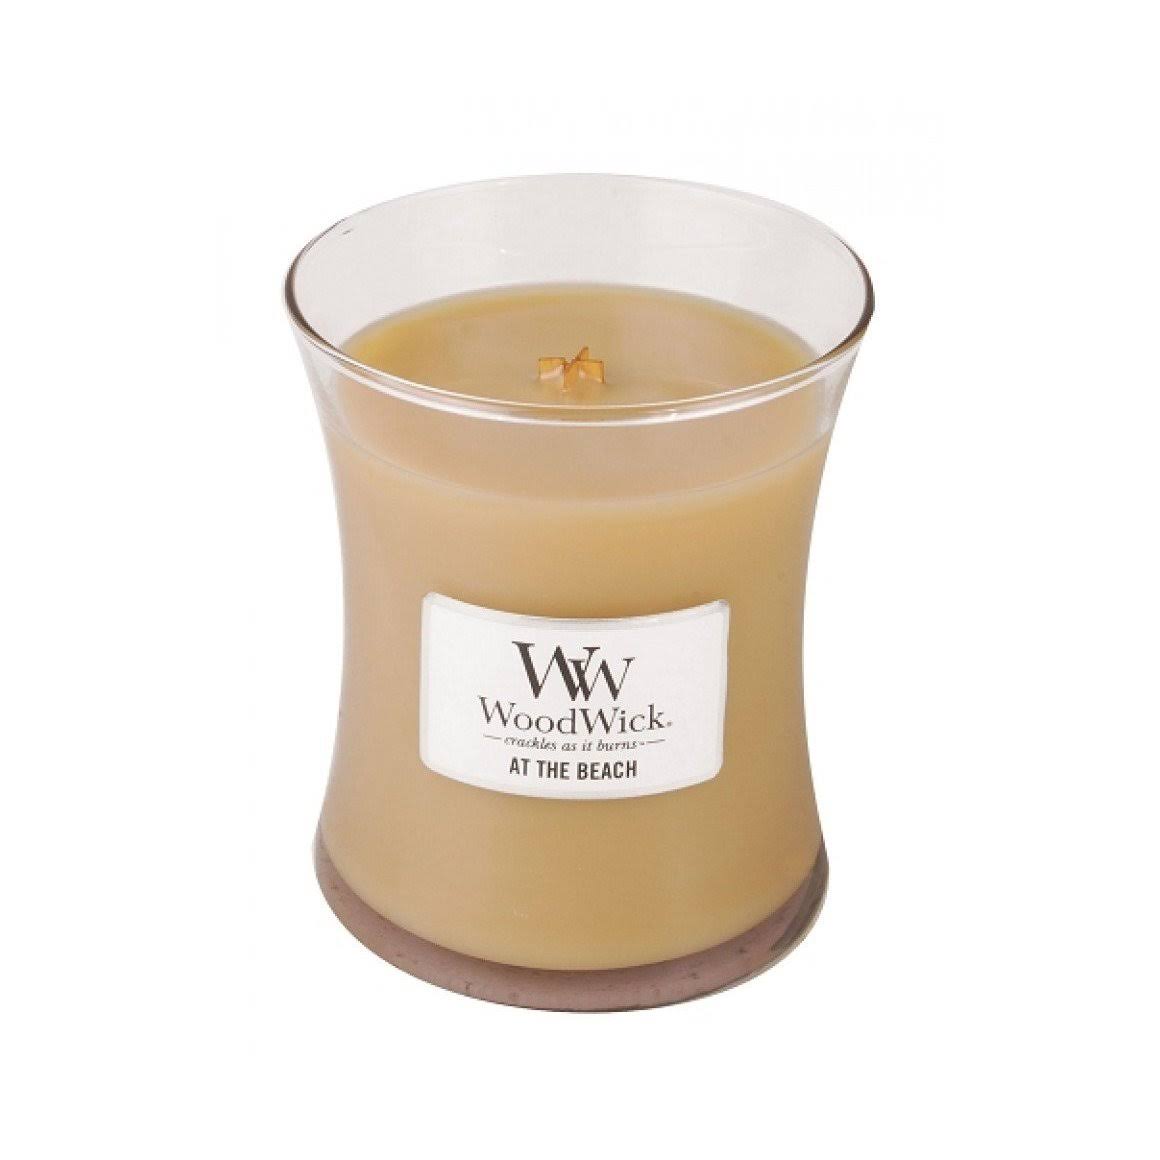 Woodwick at the Beach Scented High Quality Soy Wax Candle - Medium